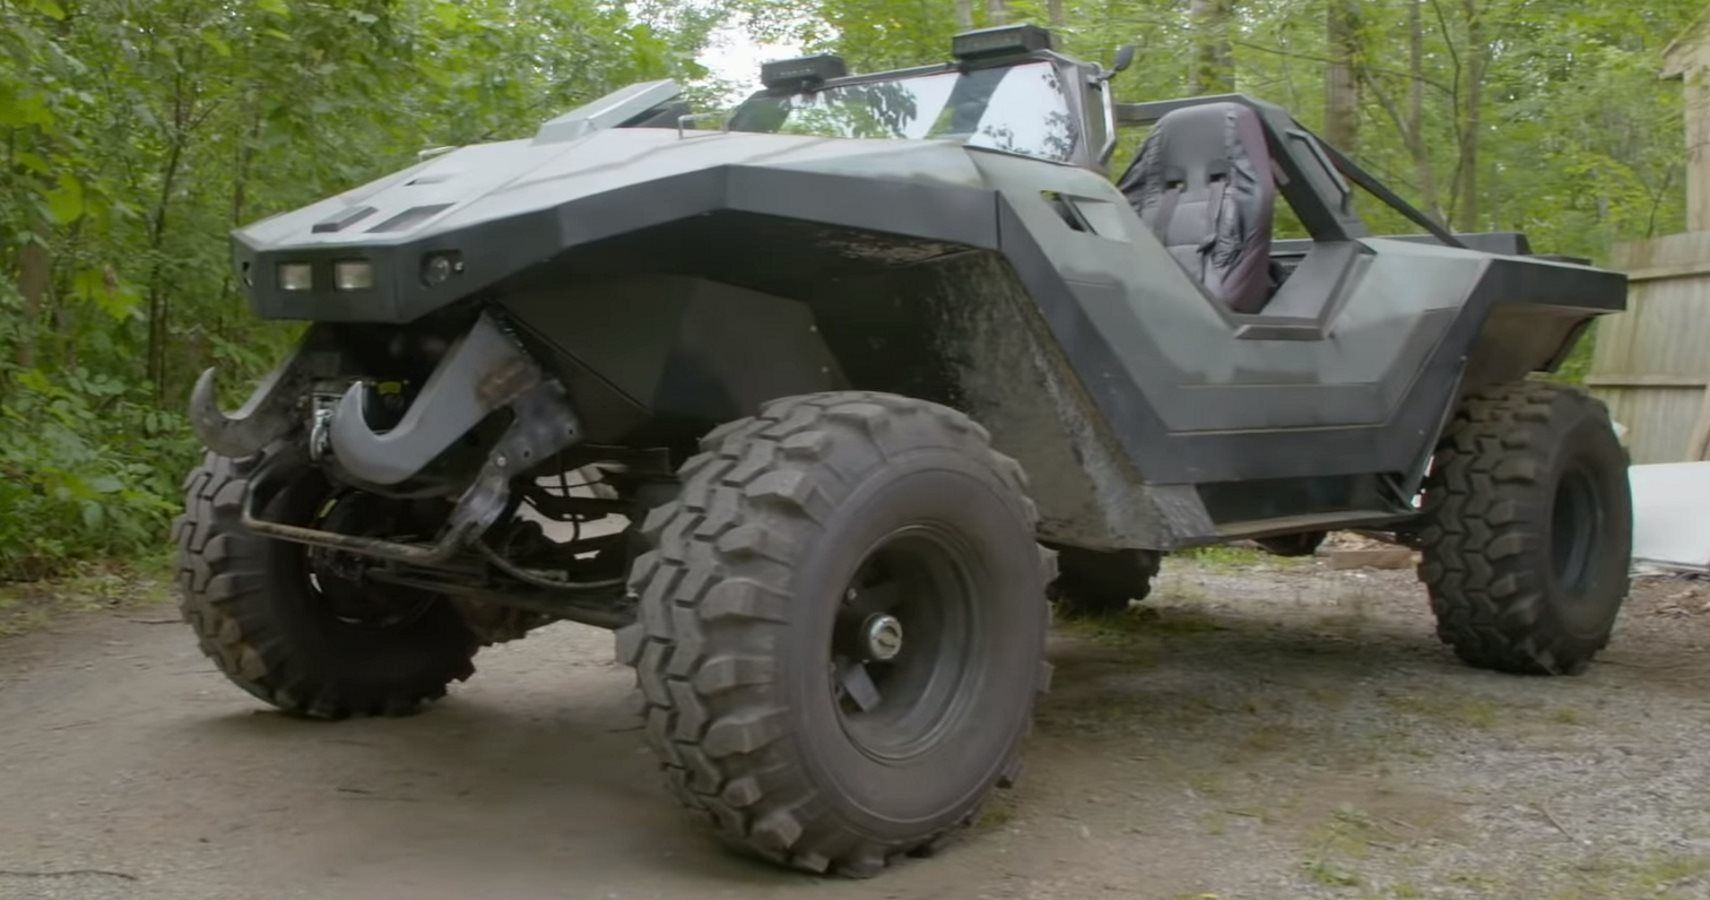 Halo Super-Fan Builds An Actual Warthog